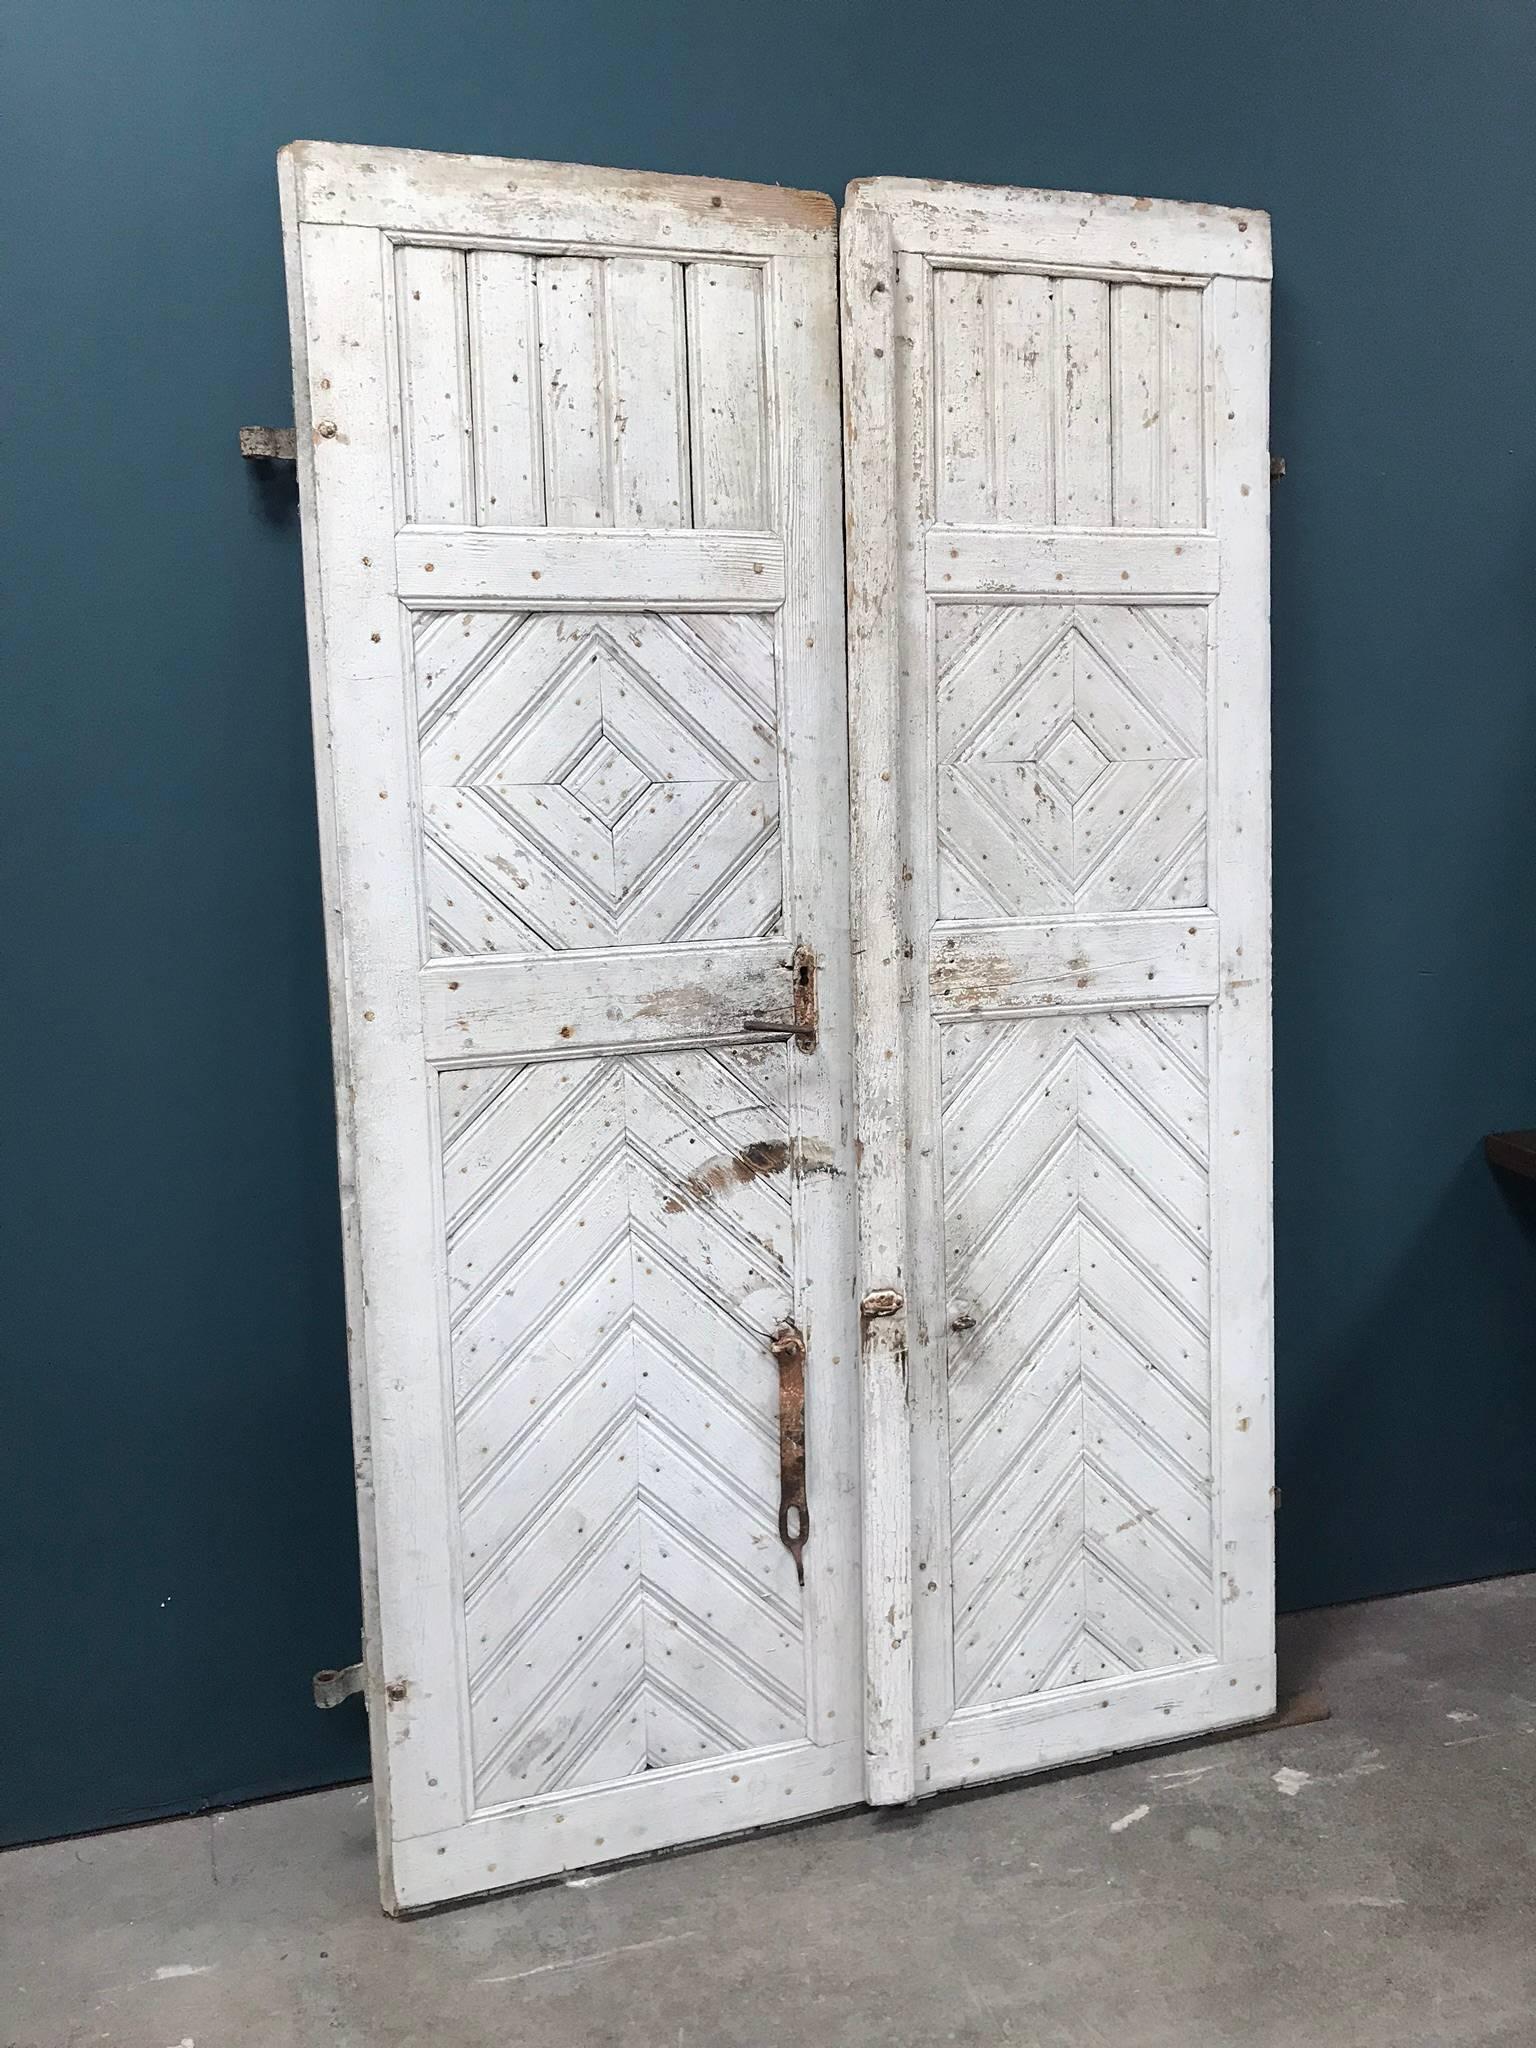 Late 19th century painted French farmhouse doors. The double door features original hardware and a unique chevron and diamond pattern. This piece would make an excellent decorative accent in your home!

Width listed reflects the overall width of